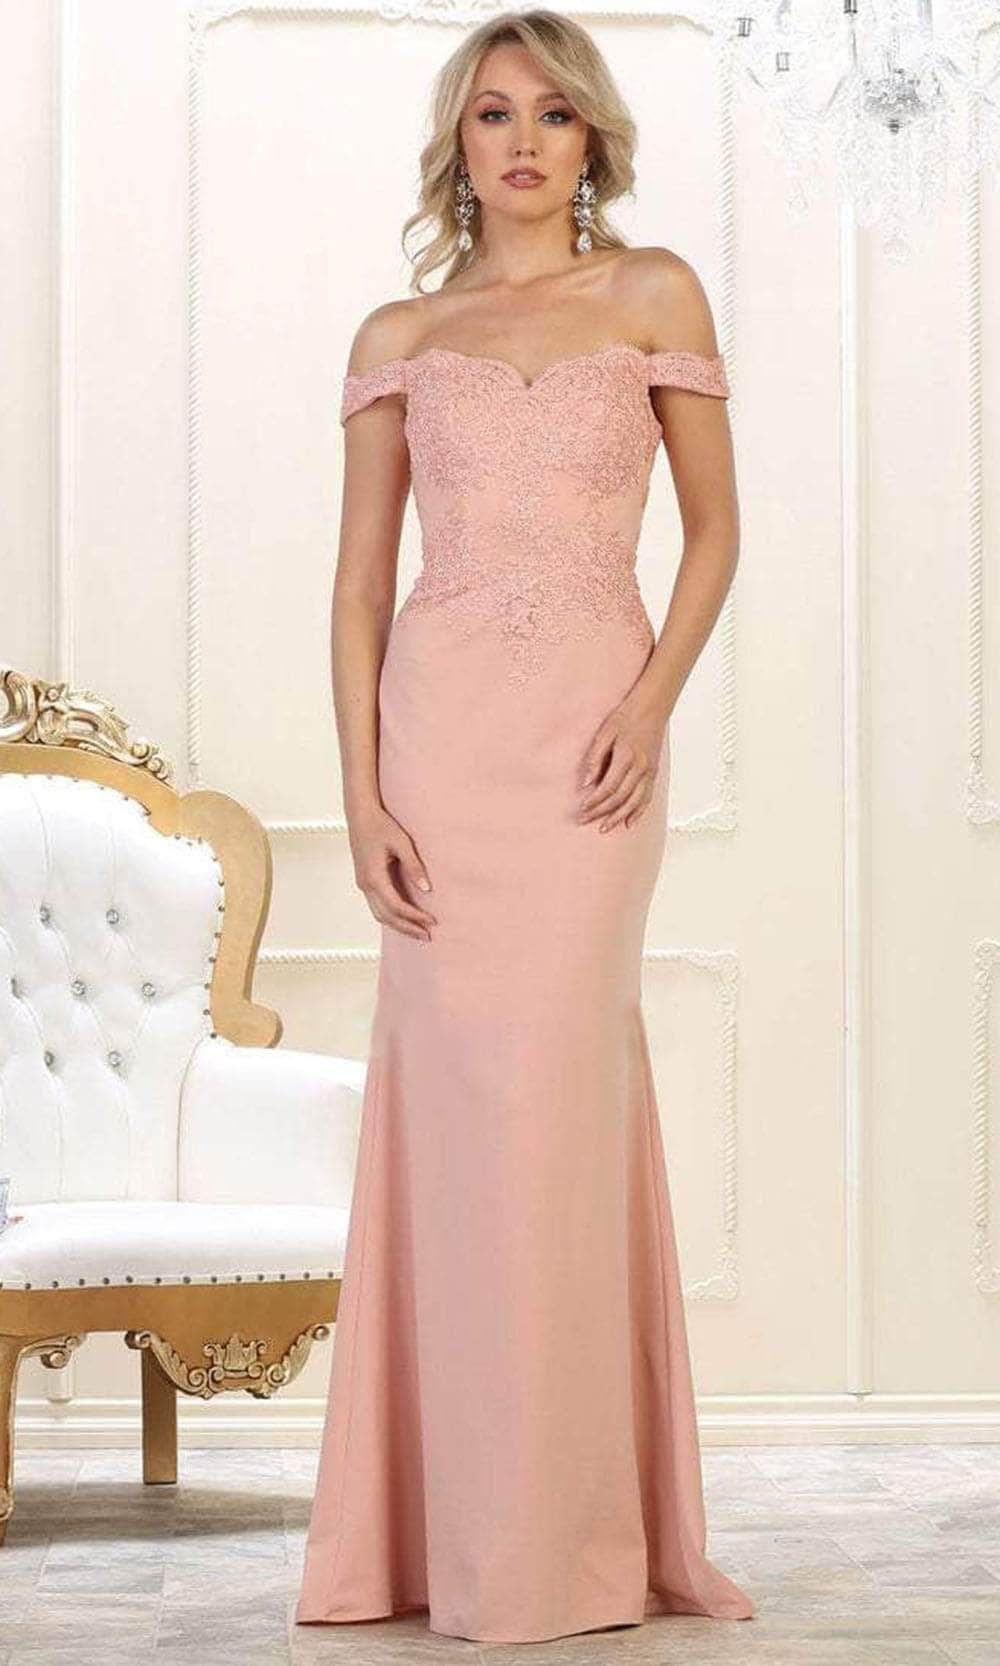 May Queen MQ1529 - Appliqued Off Shoulder Long Gown Evening Dresses